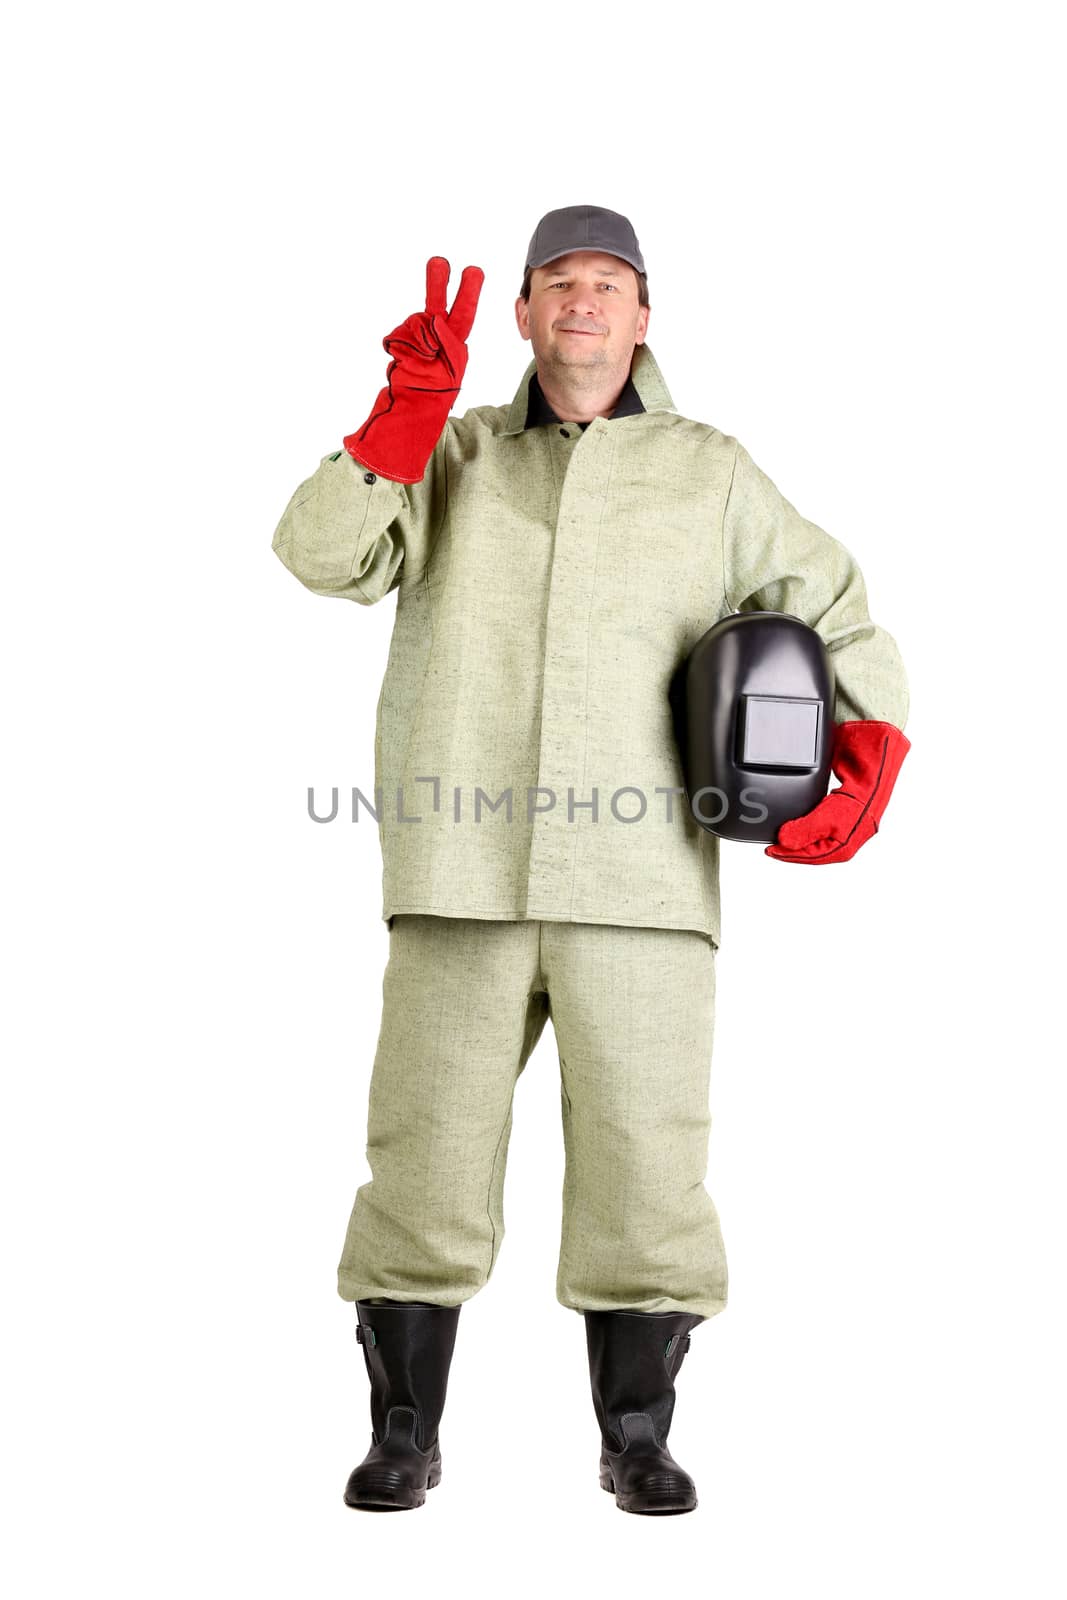 Welder shows peace sign. Isolated on a white background.